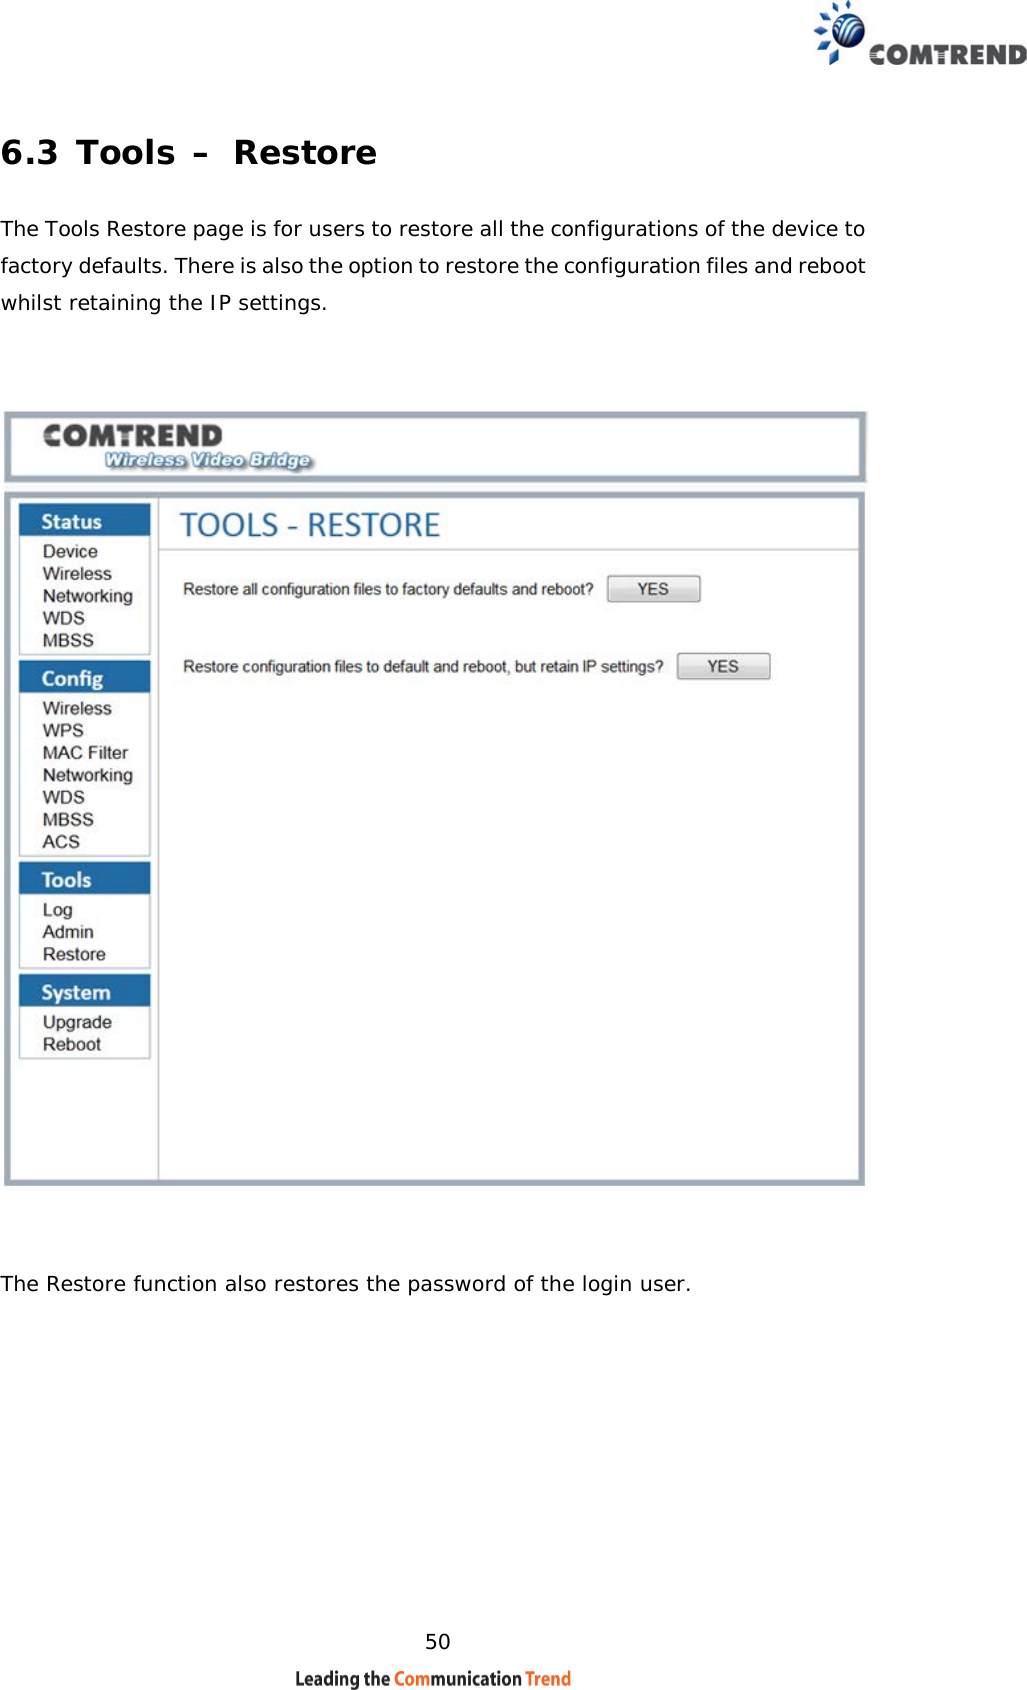    50 6.3 Tools – Restore The Tools Restore page is for users to restore all the configurations of the device to factory defaults. There is also the option to restore the configuration files and reboot whilst retaining the IP settings.       The Restore function also restores the password of the login user.      